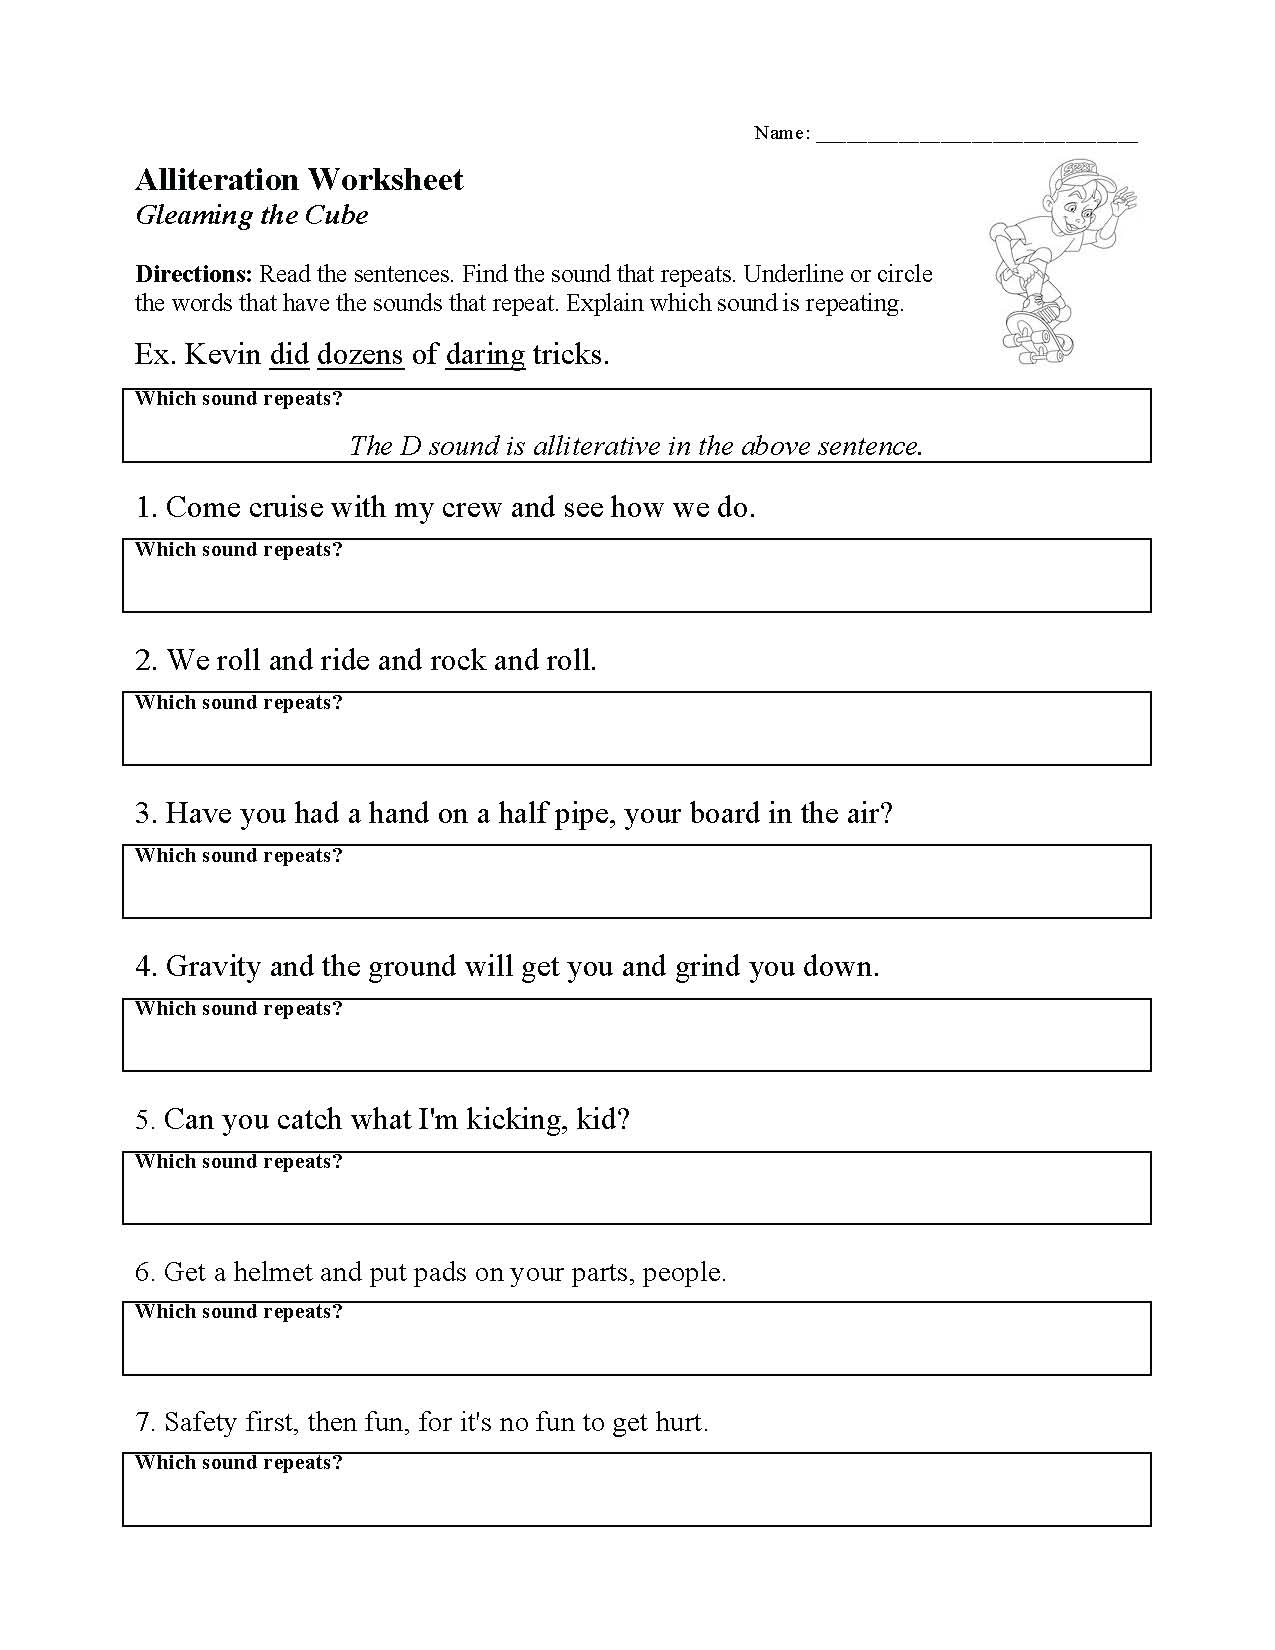 This is a preview image of our Alliteration Worksheet. Click on it to enlarge or view the source file.